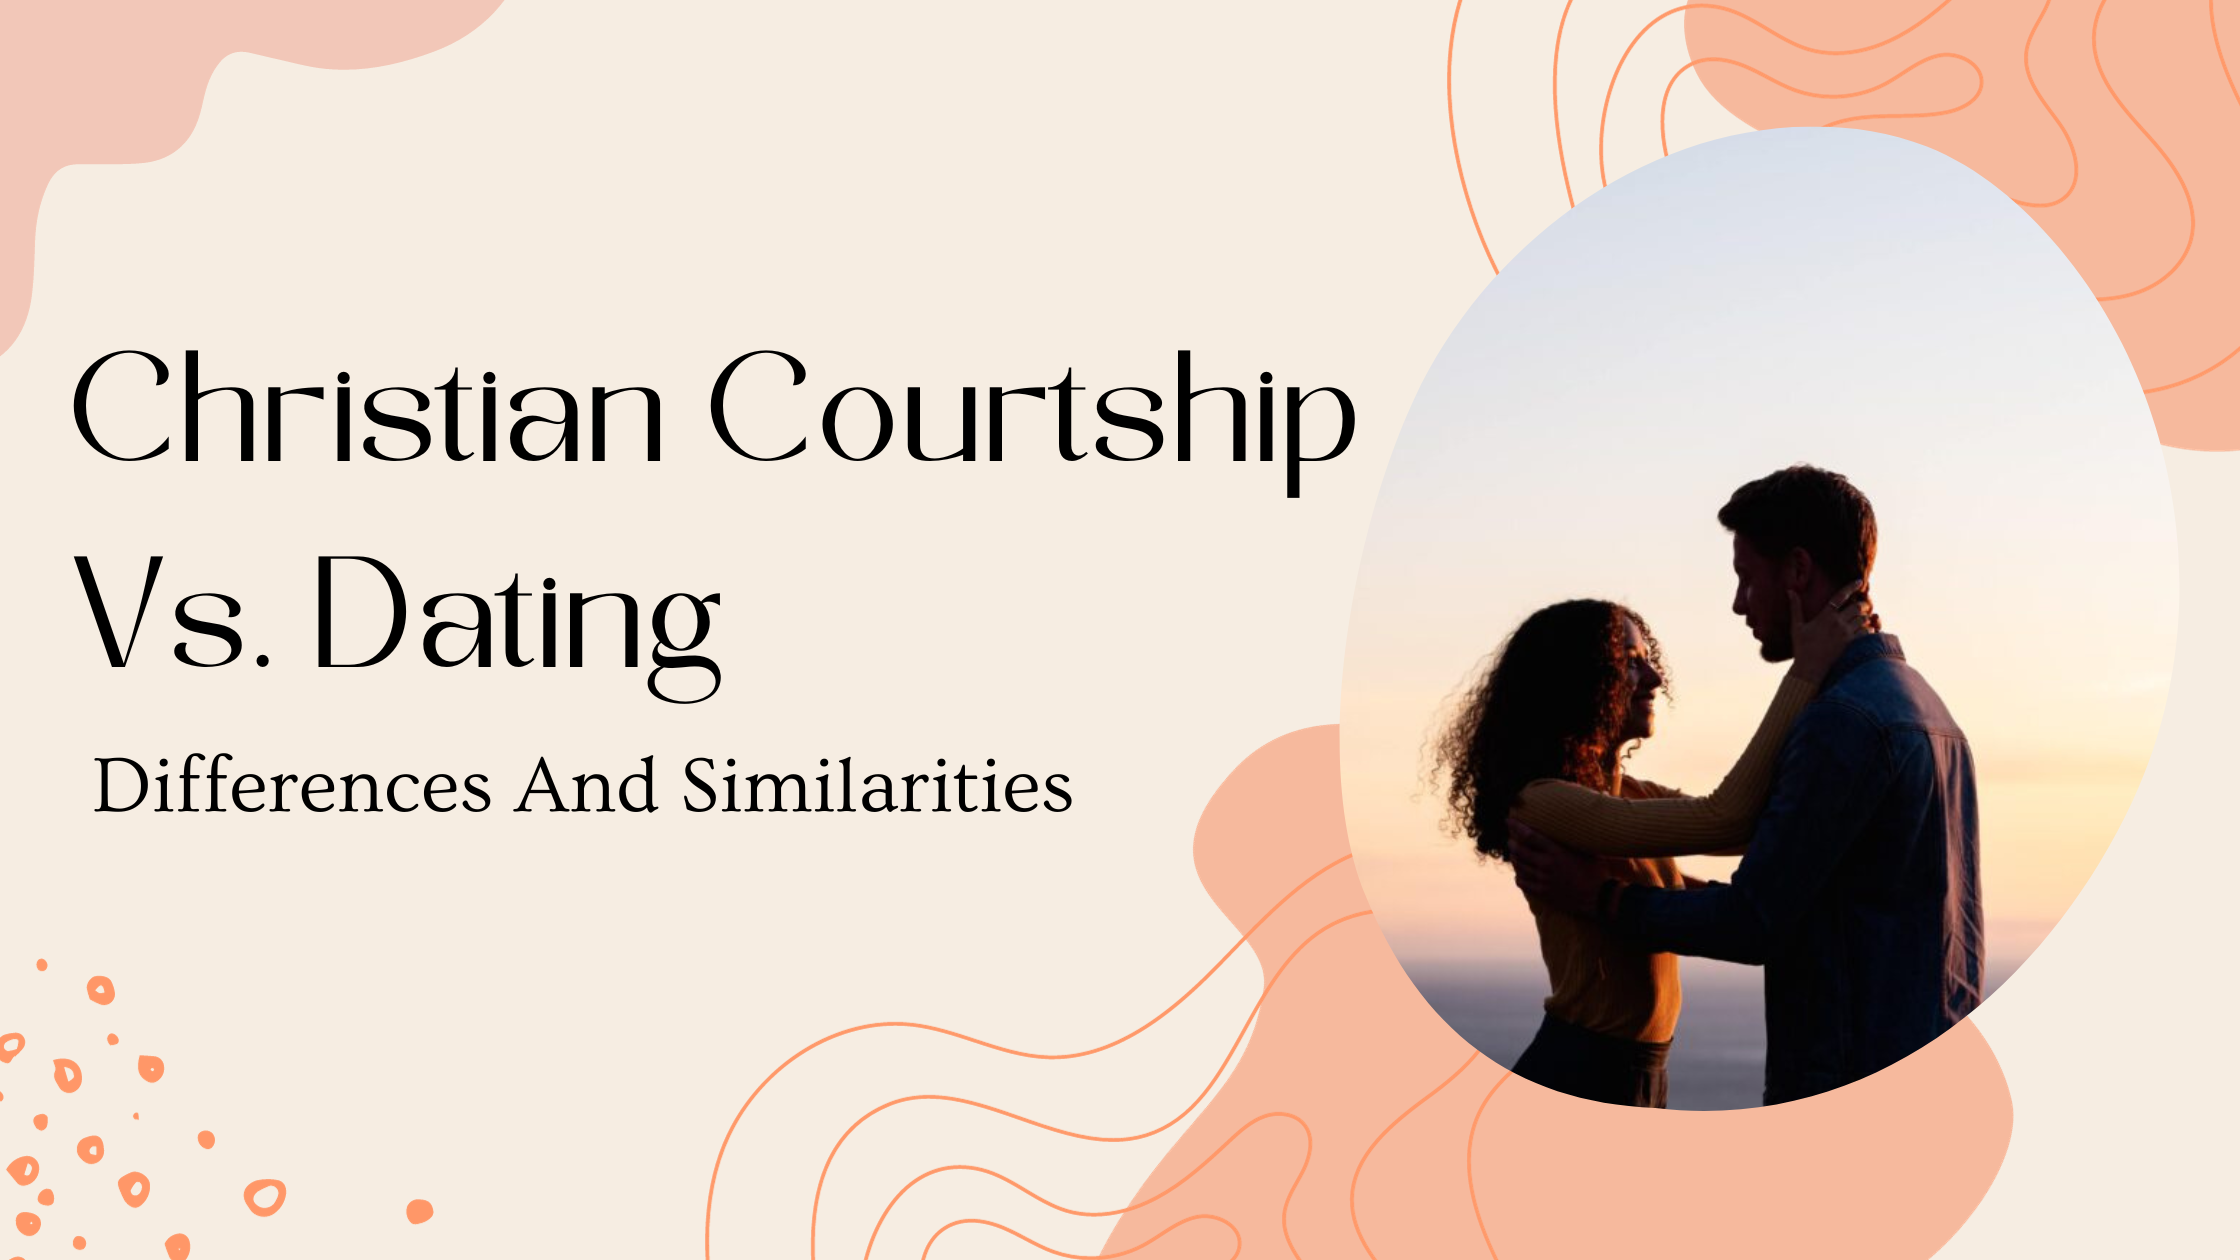 Christian Courtship Vs. Dating: Differences And Similarities